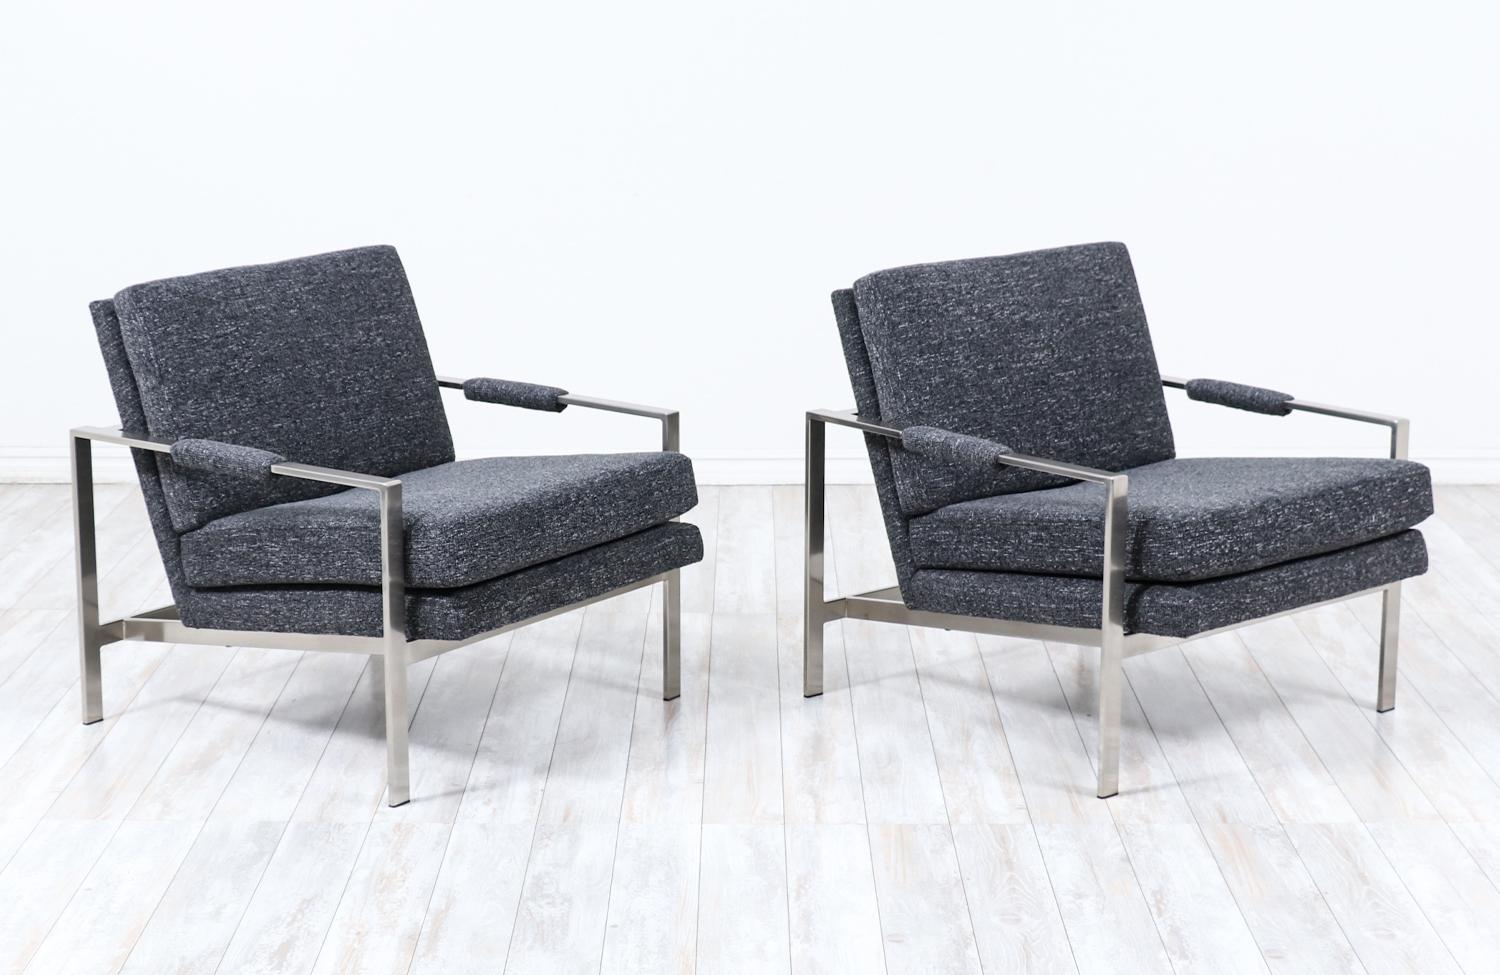 Milo Baughman Steel Lounge Chairs for Thayer Coggin

________________________________________

Transforming a piece of Mid-Century Modern furniture is like bringing history back to life, and we take this journey with passion and precision. With over